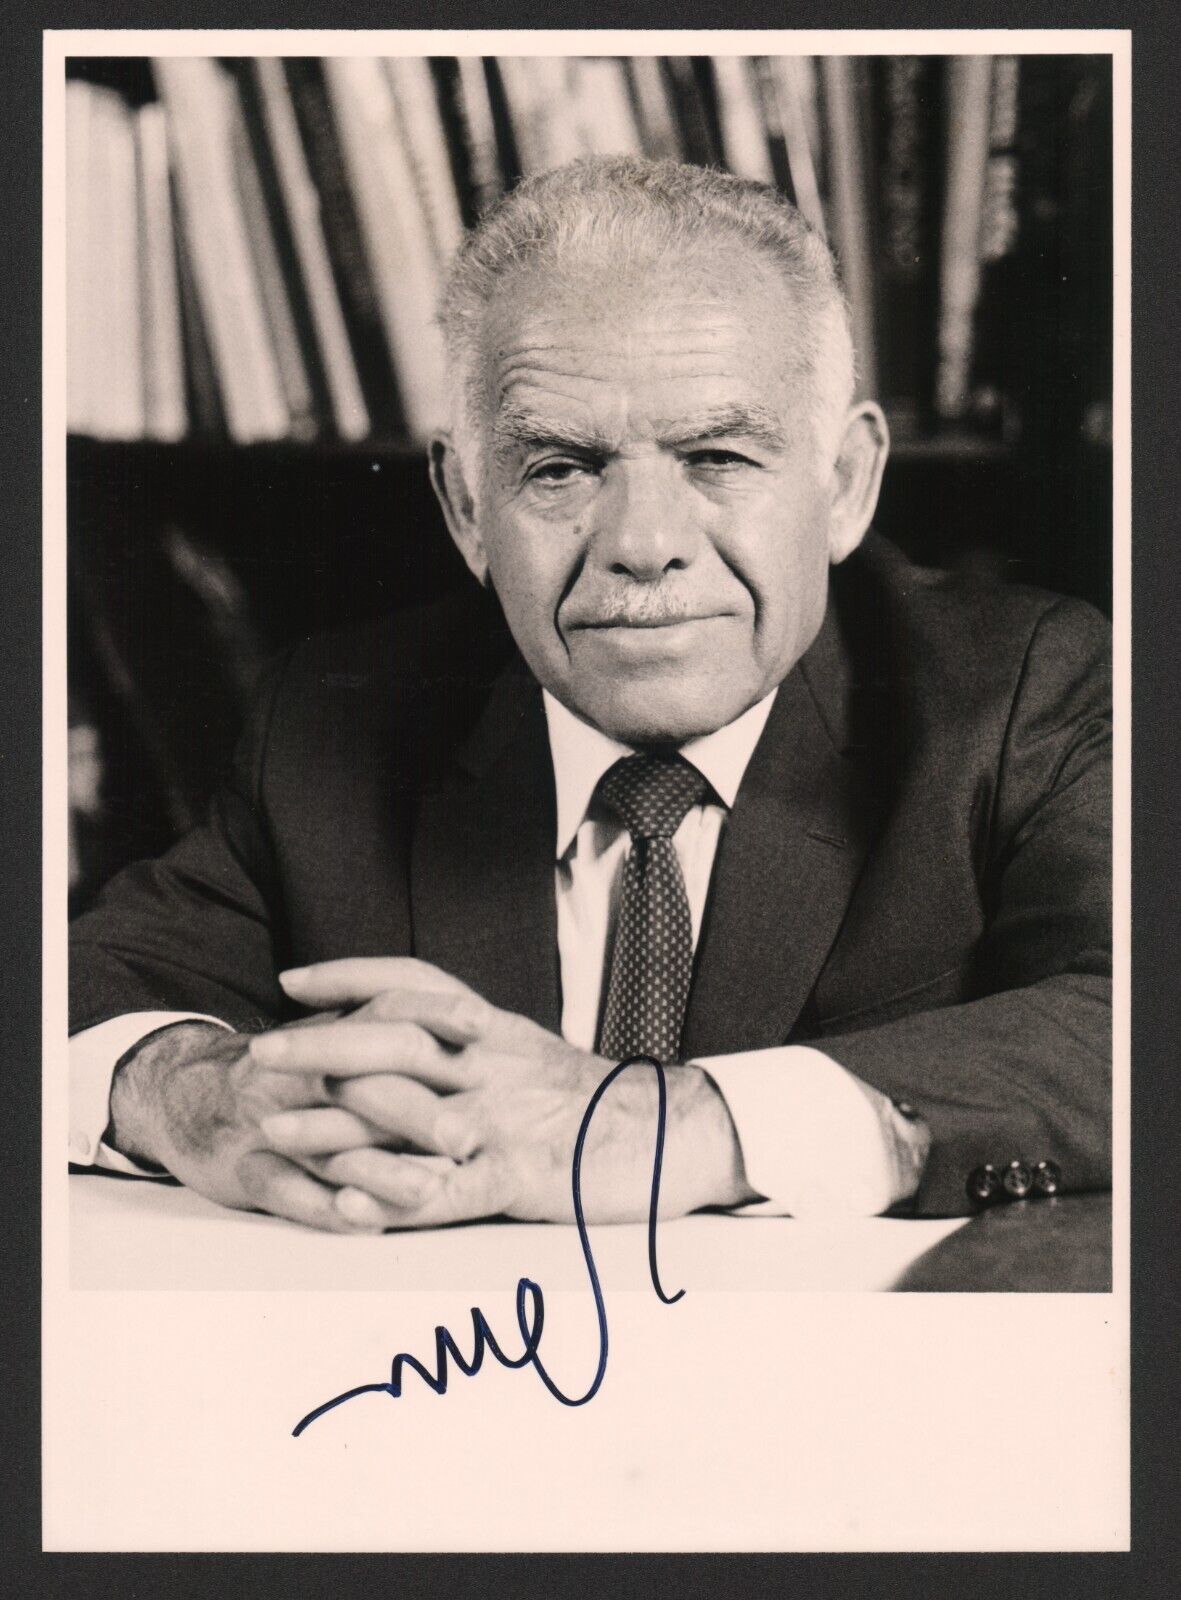 Yitzhak Shamir Signed Photograph, the seventh prime minister of Israel